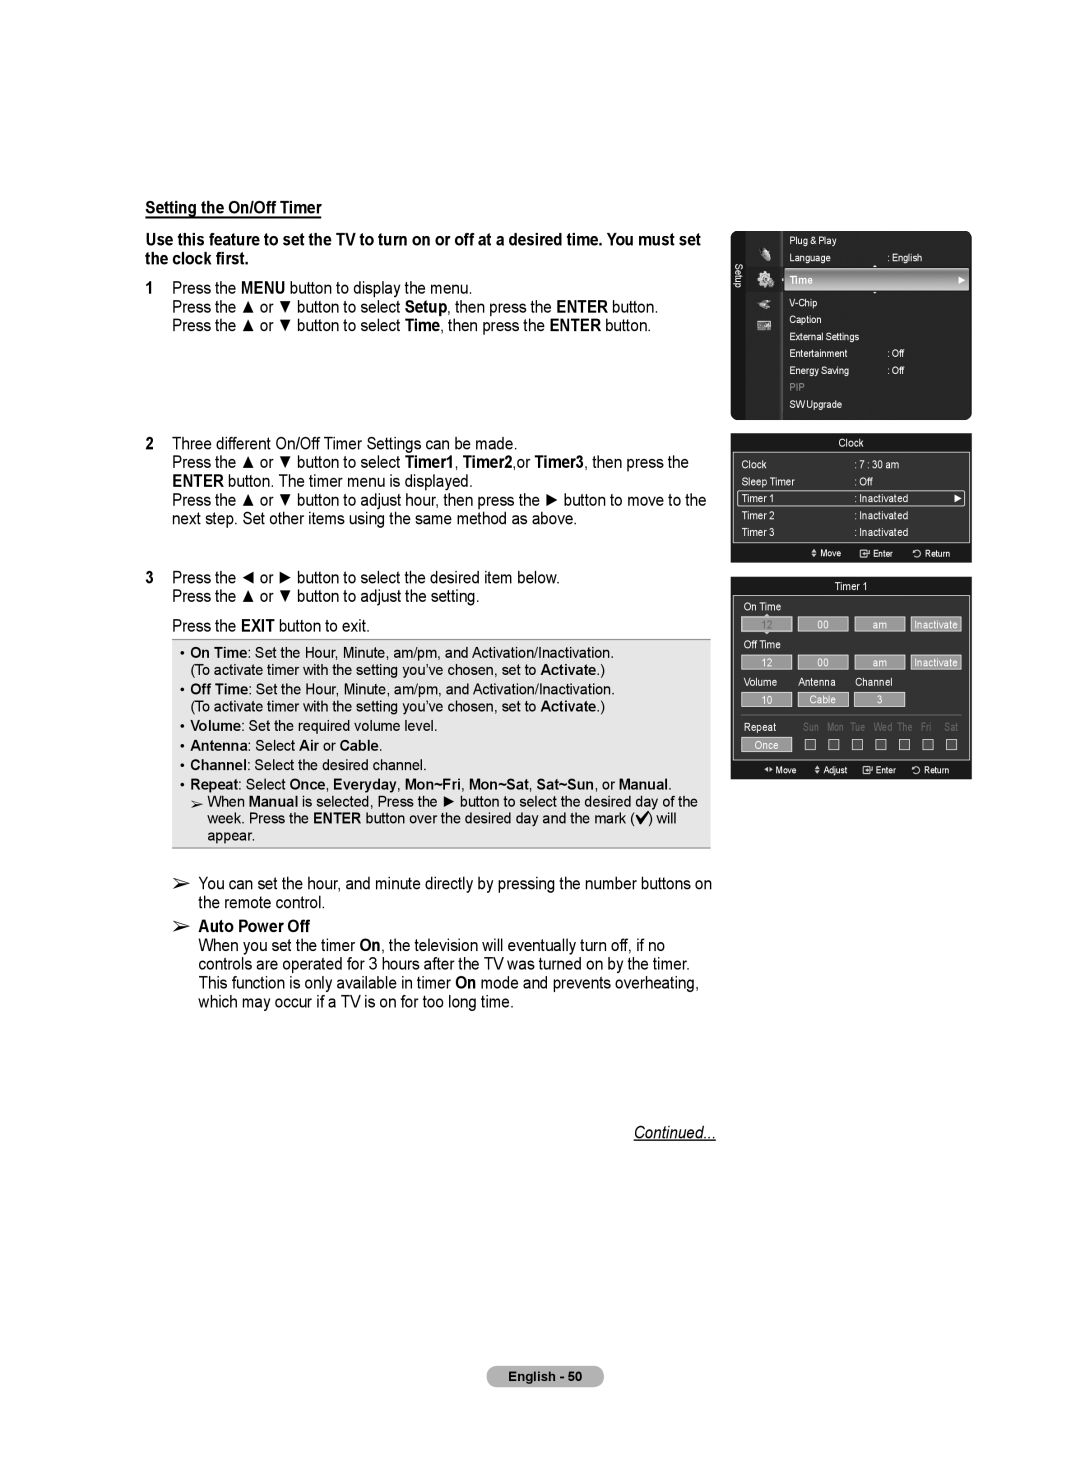 Samsung 510 user manual Setting the On/Off Timer, Auto Power Off, Continued, Antenna Select Air or Cable 